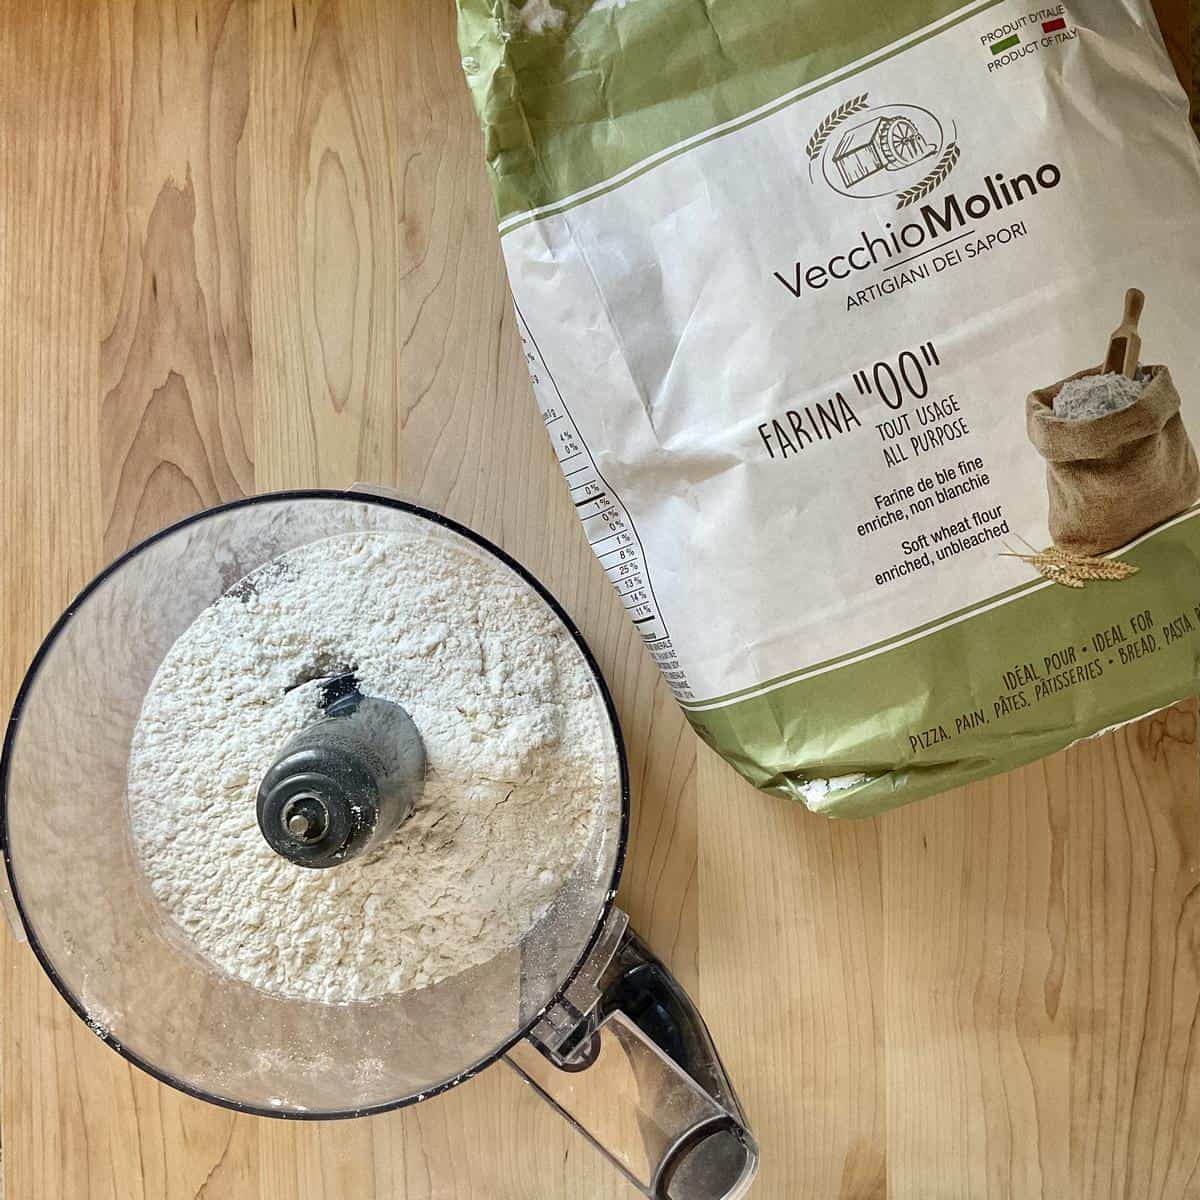 A package of Italian 00 flour next to a food processor.